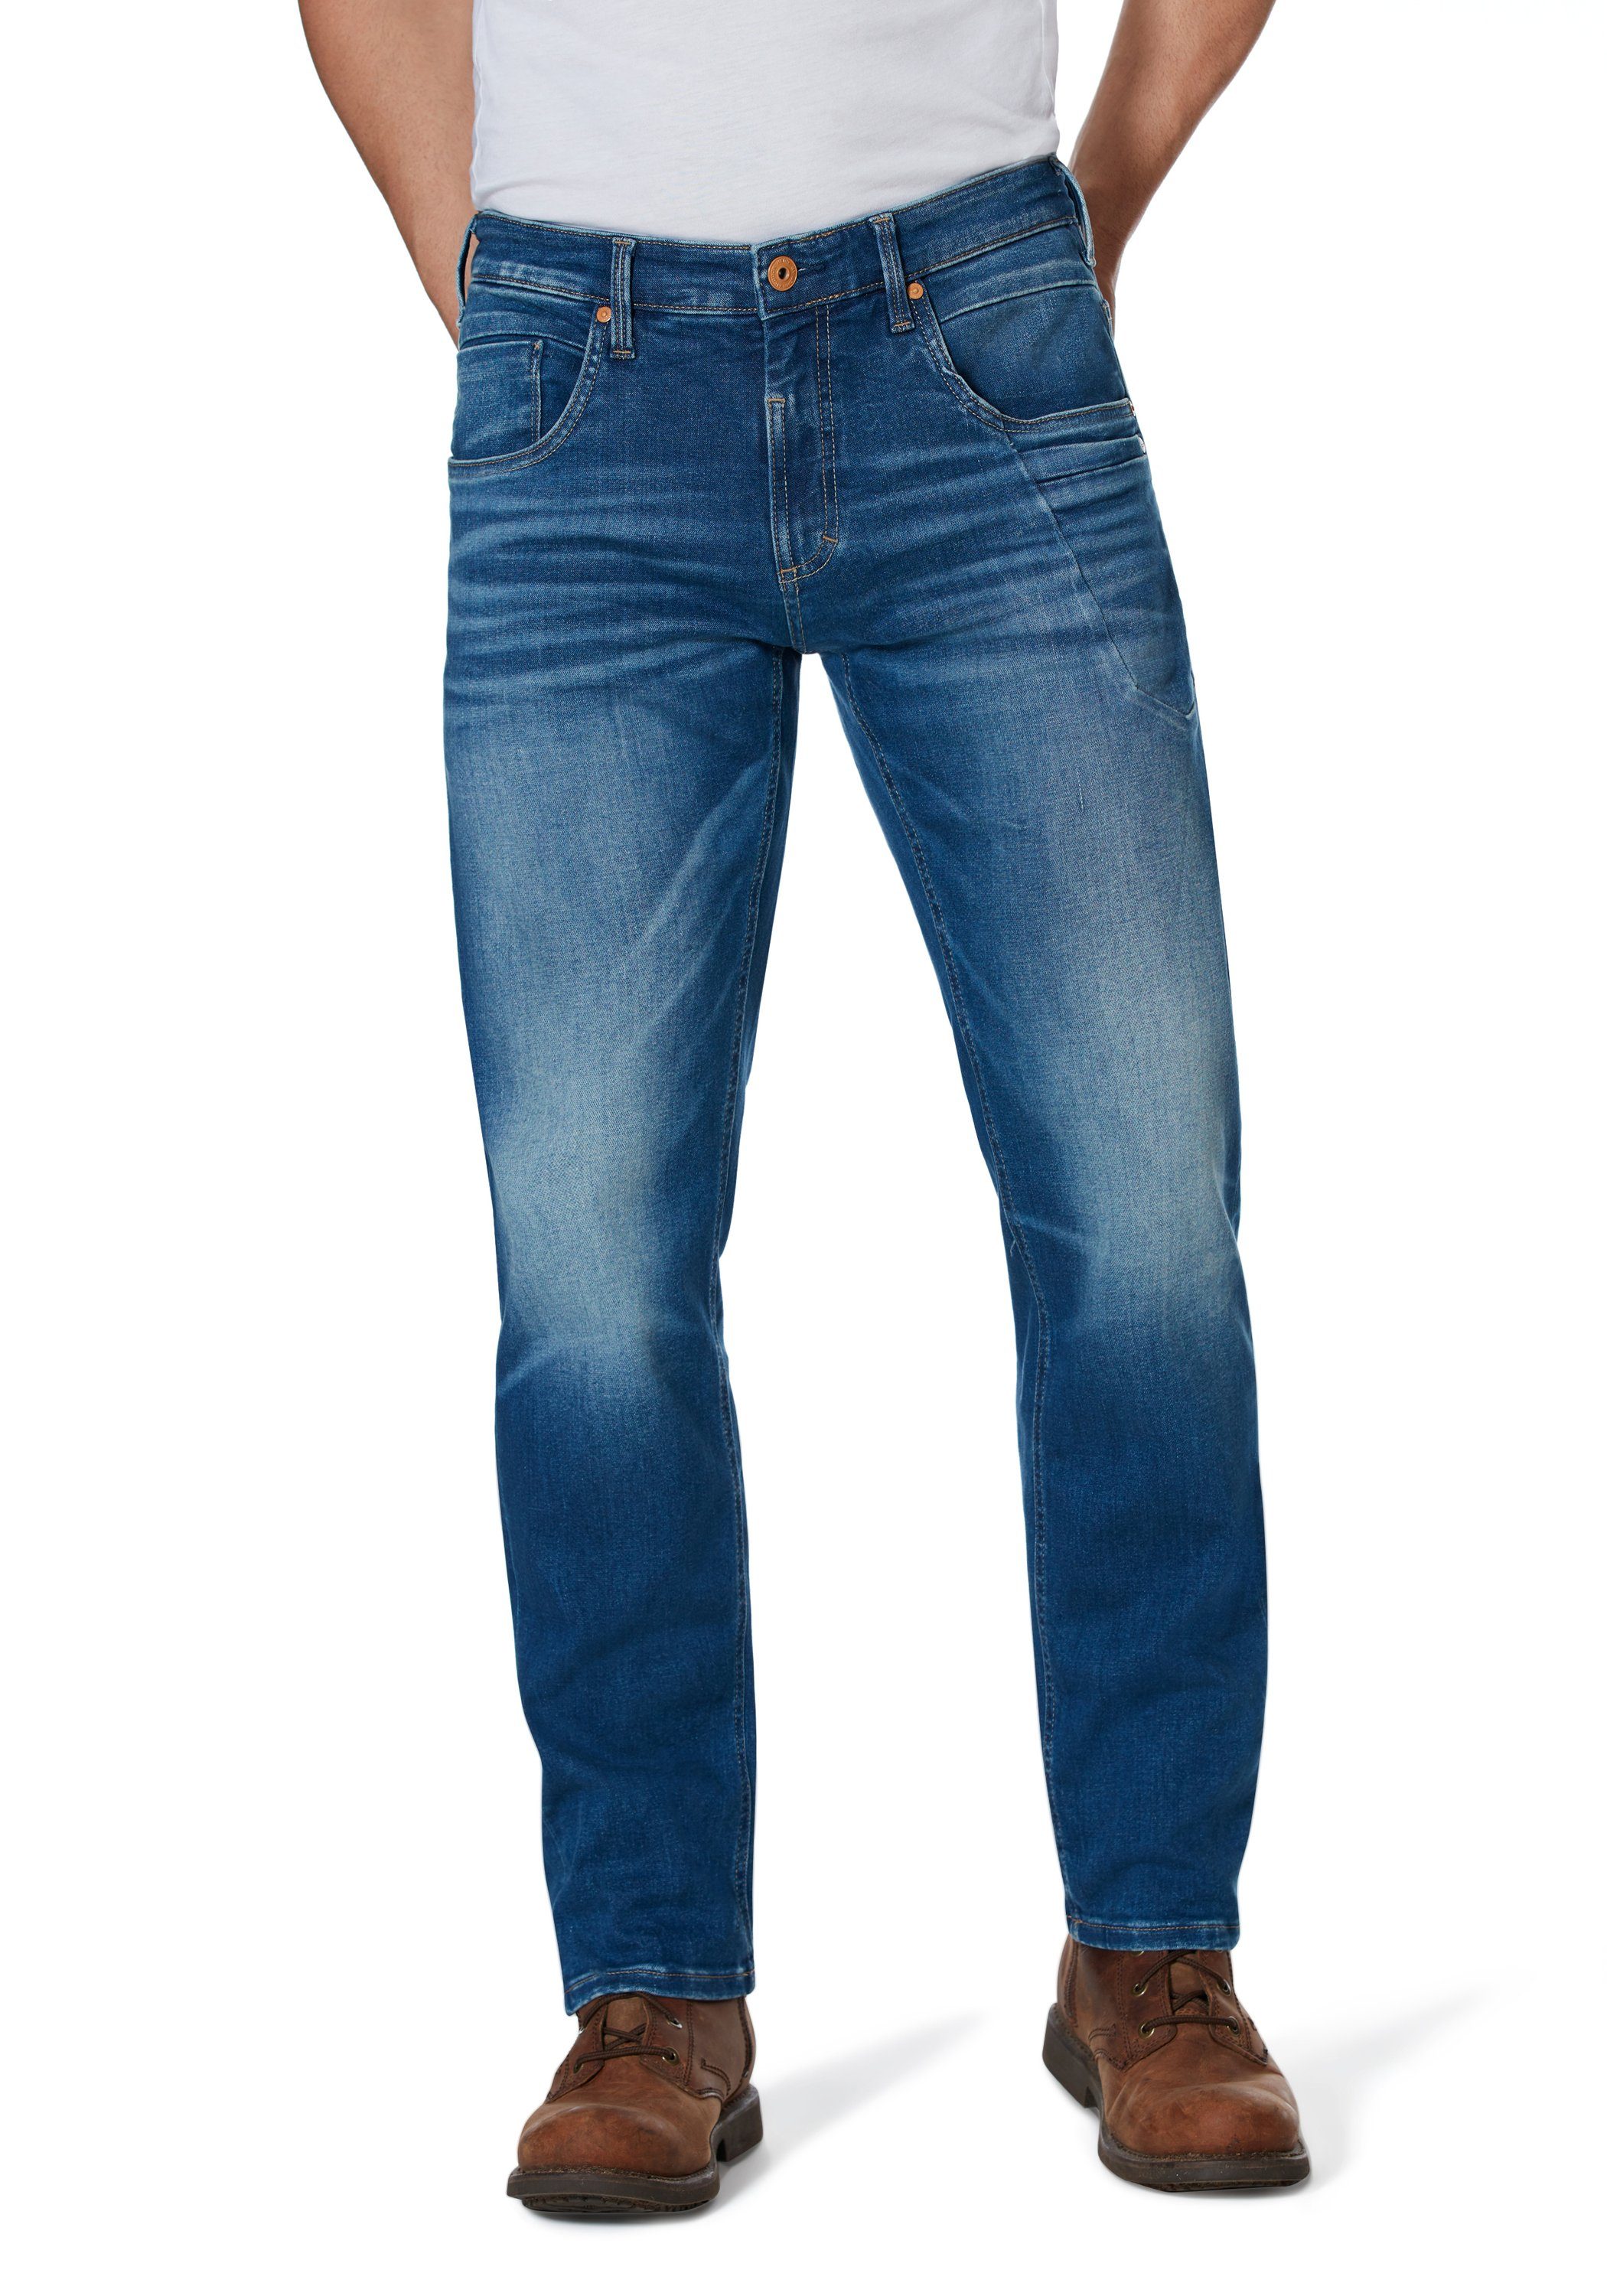 HERO by John Medoox 5-Pocket-Jeans Baxter Denim Relaxed Fit heavy wash